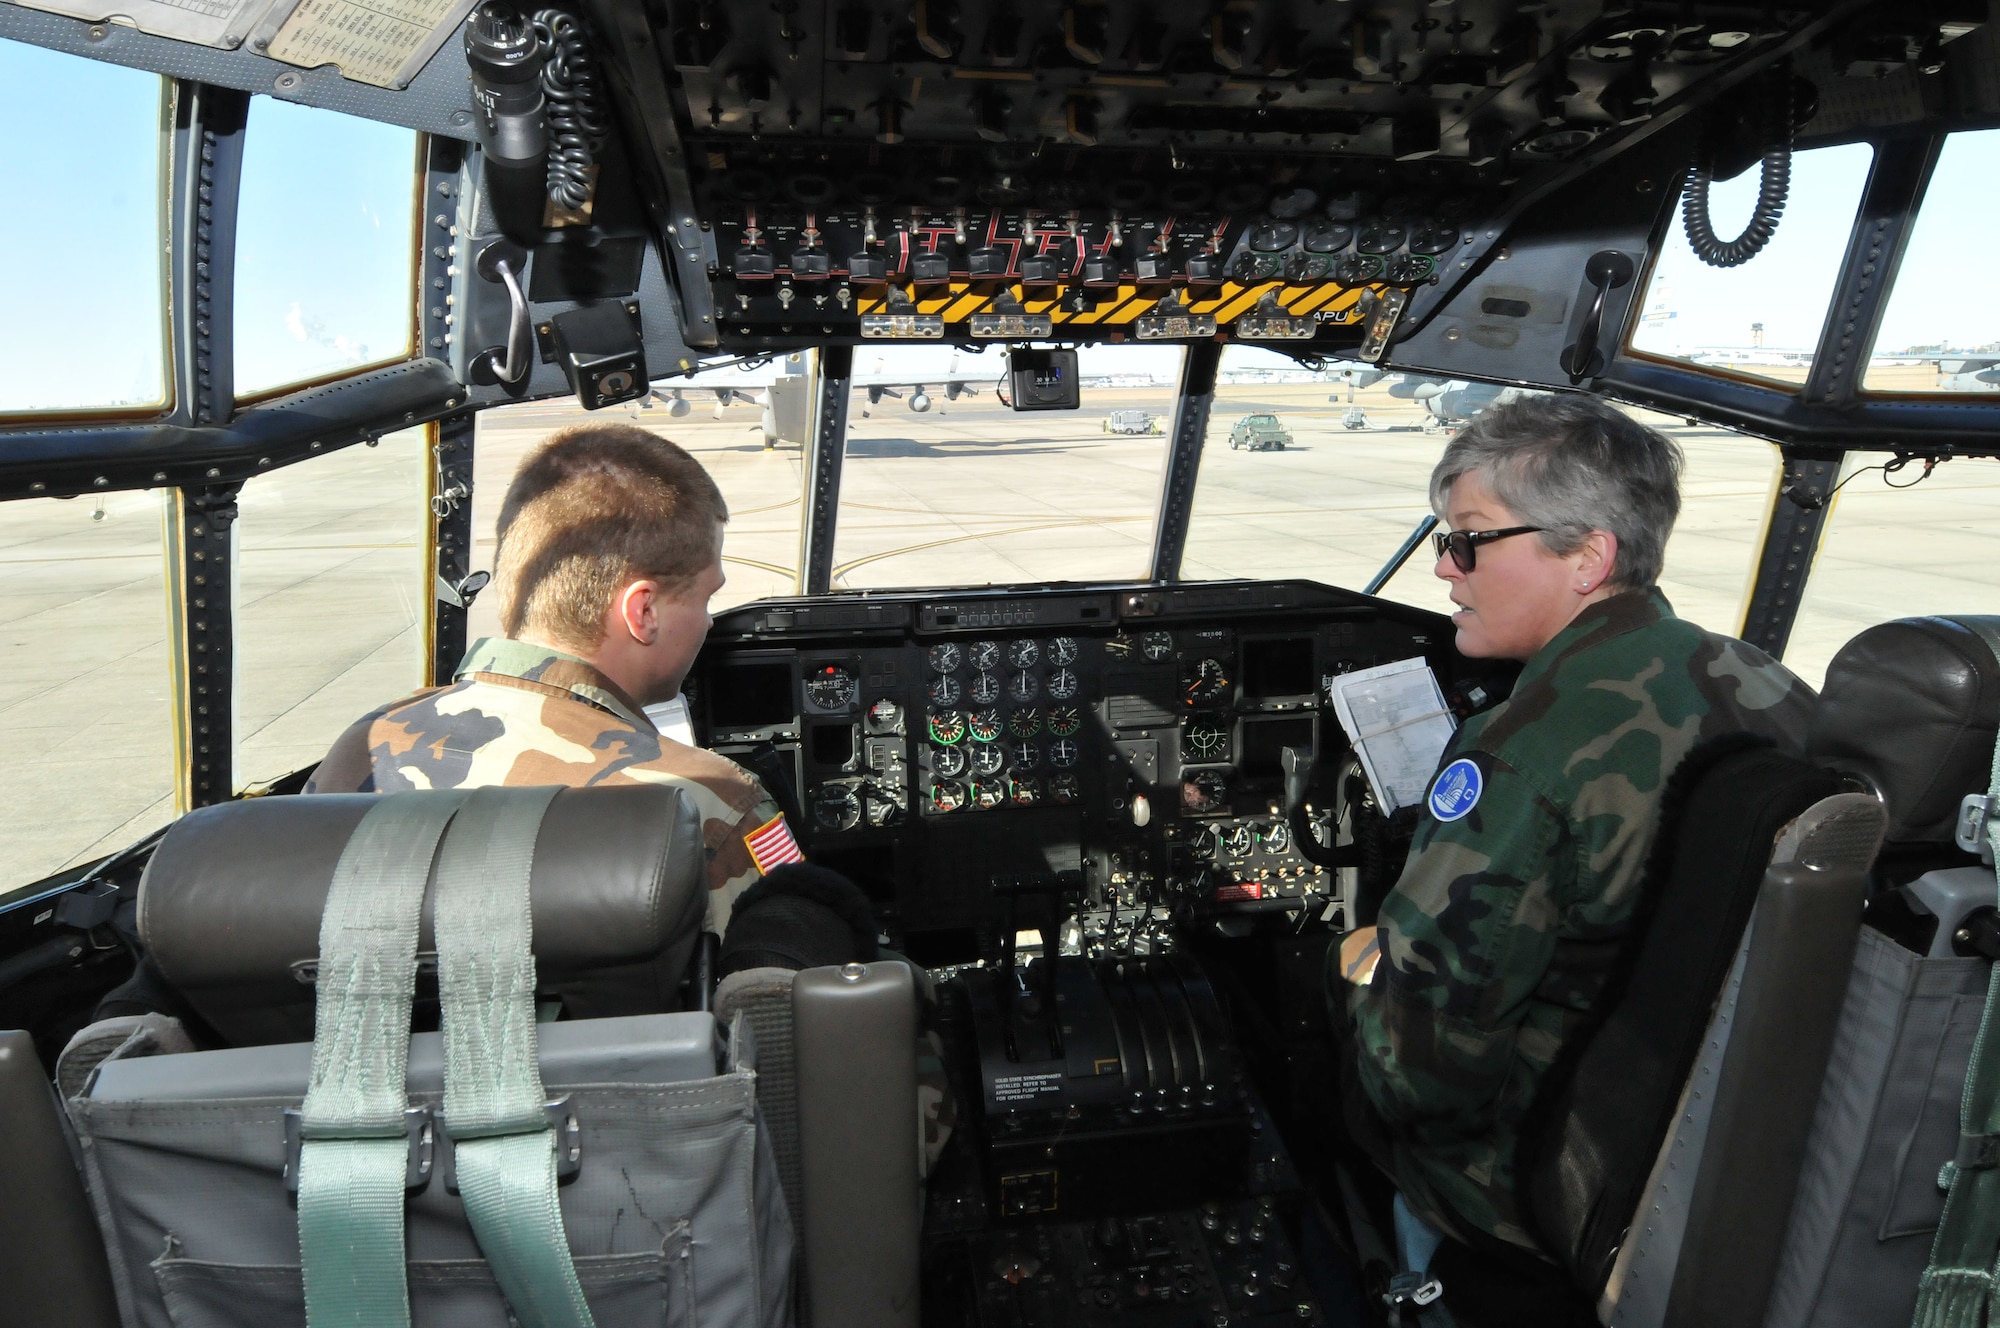 Maj. Dana Glenn, commander of Gastonia Composite Squadron, NC 024, North Carolina Wing Civil Air Patrol and cadet Kenton D. Brown, take a pilot’s view on board a 145th Airlift Wing, C-130 Hercules aircraft during a tour at the North Carolina Air Nation Guard base, Charlotte Douglas Intl. airport, January 22, 2014.  Providing tours to these cadets is one way the NCANG gives back to the community by providing students an opportunity to see firsthand the importance of the sacrifices that have been made in the past, and what it takes to continue to do well in the future.  (U.S. Air National Guard photo by Master Sgt. Patricia F. Moran/Released)